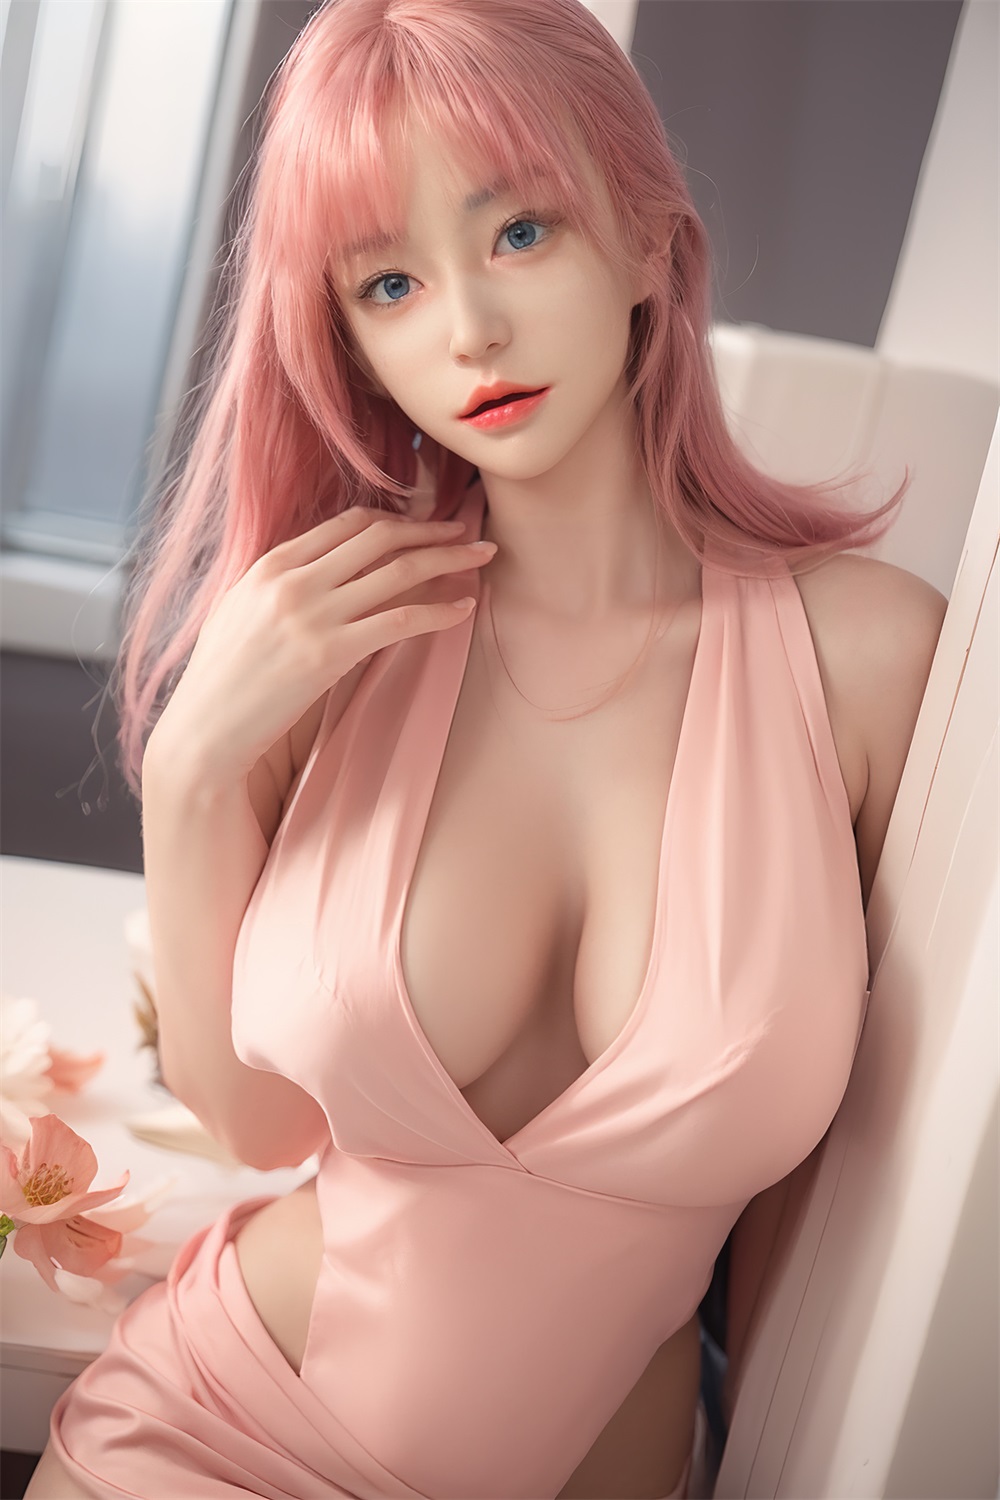 Haruka - 5ft 5/164cm ROS Sex Doll With Option To Add Blowjob E-Hips Sucking 3 In 1